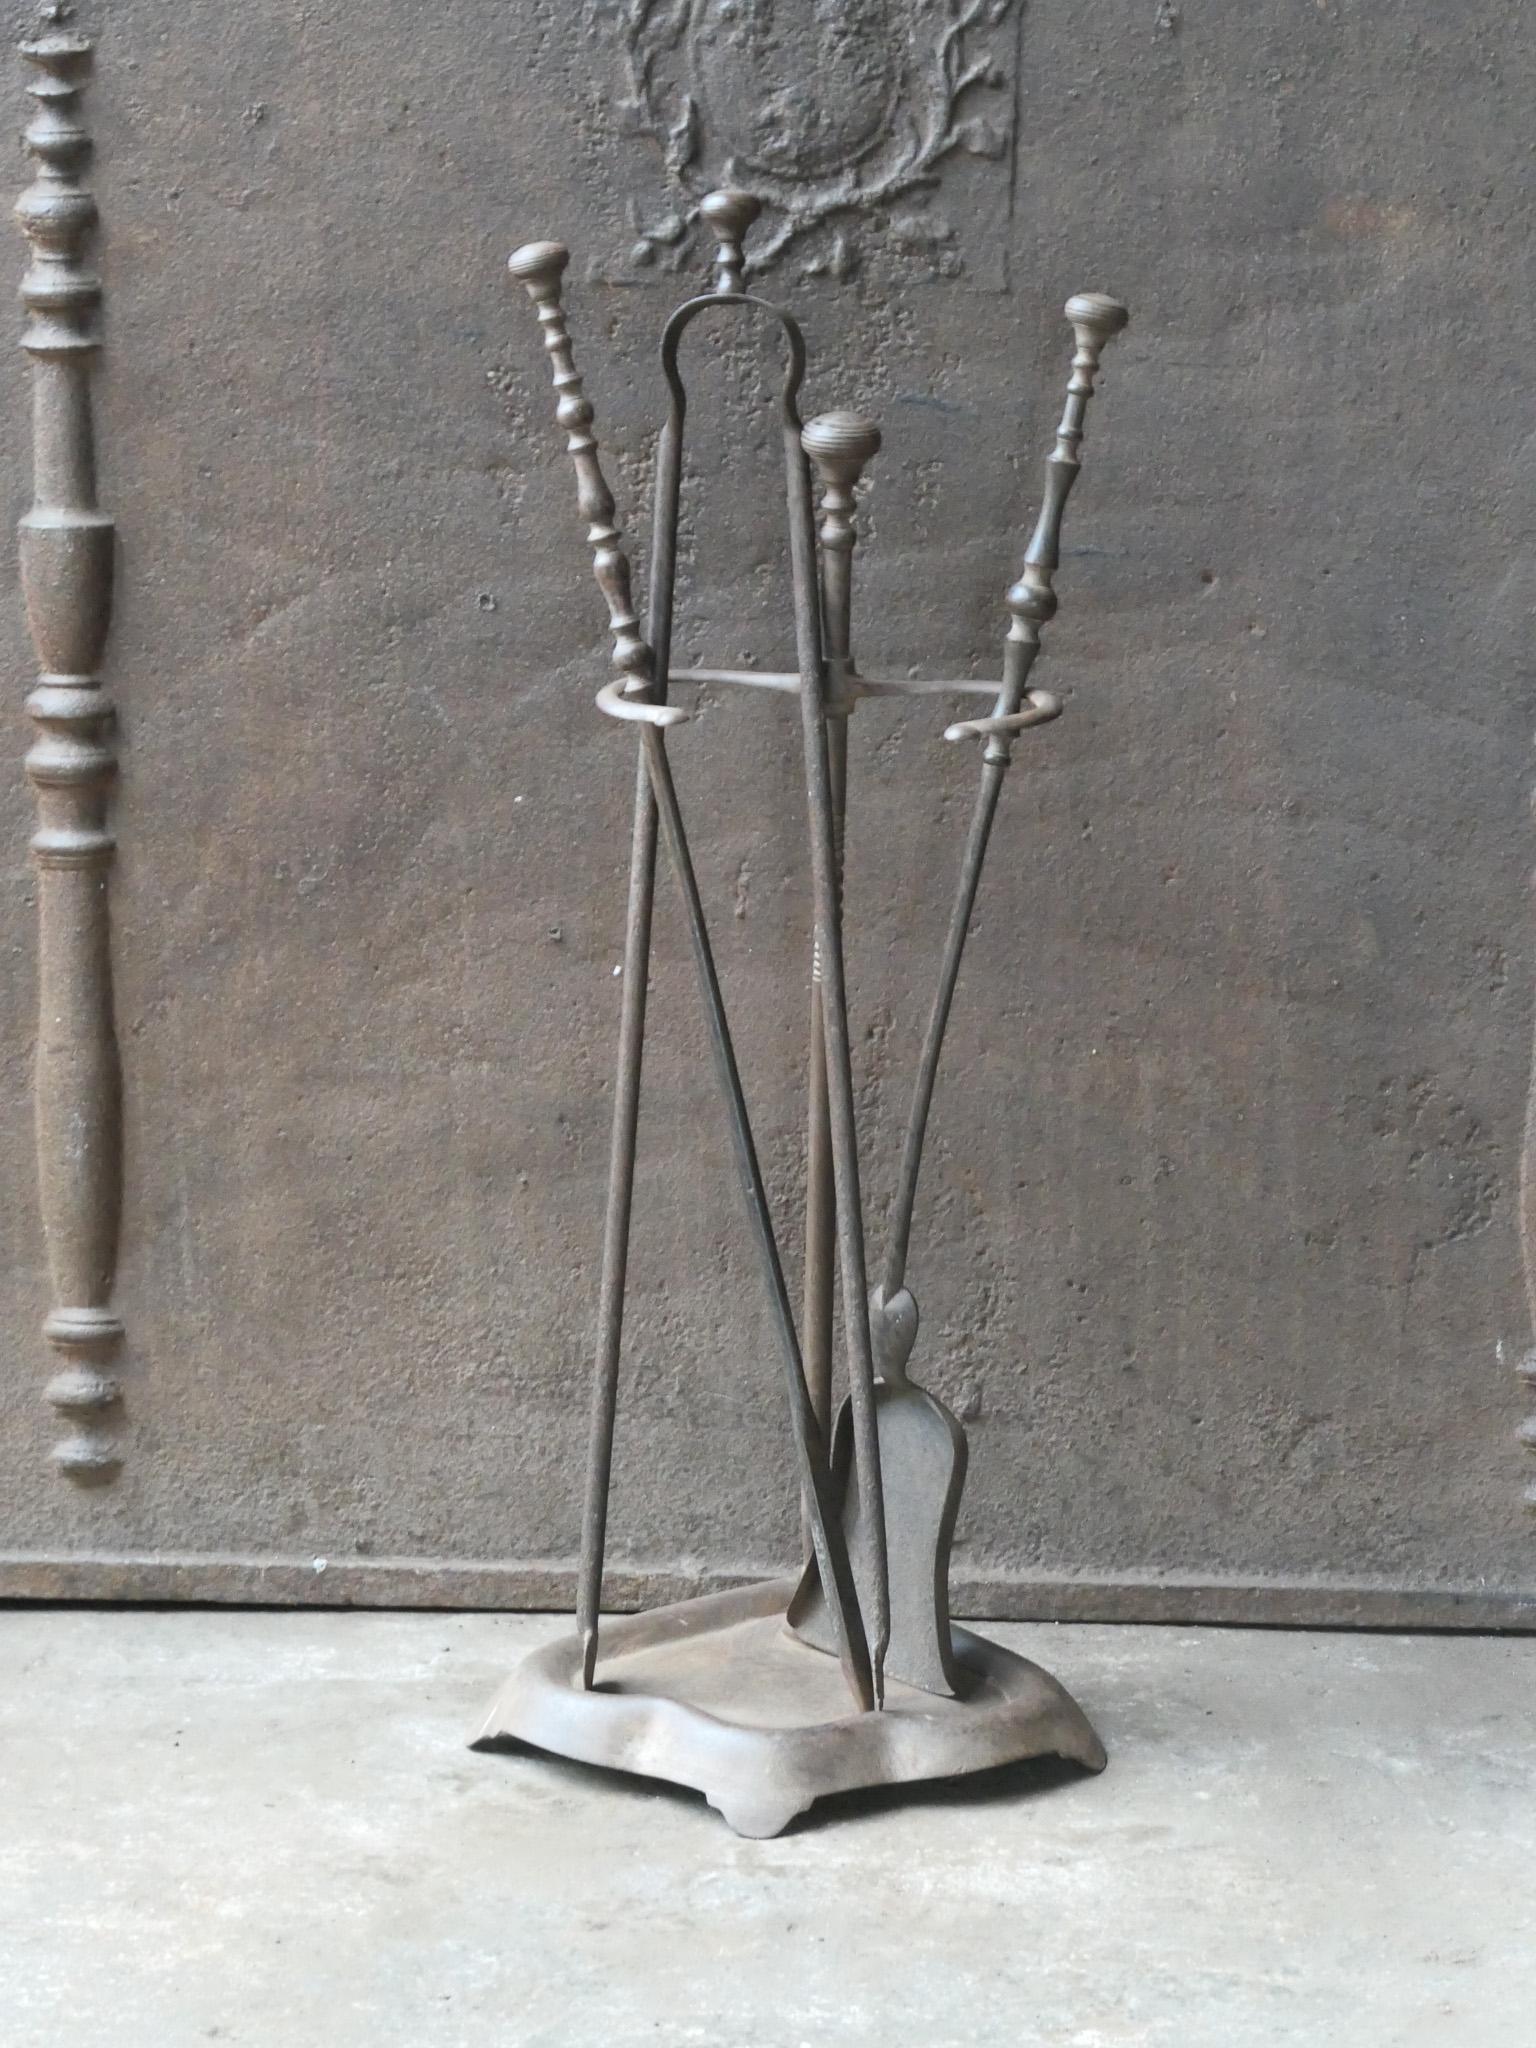 19th century French fireplace tool set. The tool set consists of tongs, shovel, poker and a stand. The tools are made of wrought iron and the stand of wrought and cast iron. The set is in a good condition and fit for use in the fireplace.